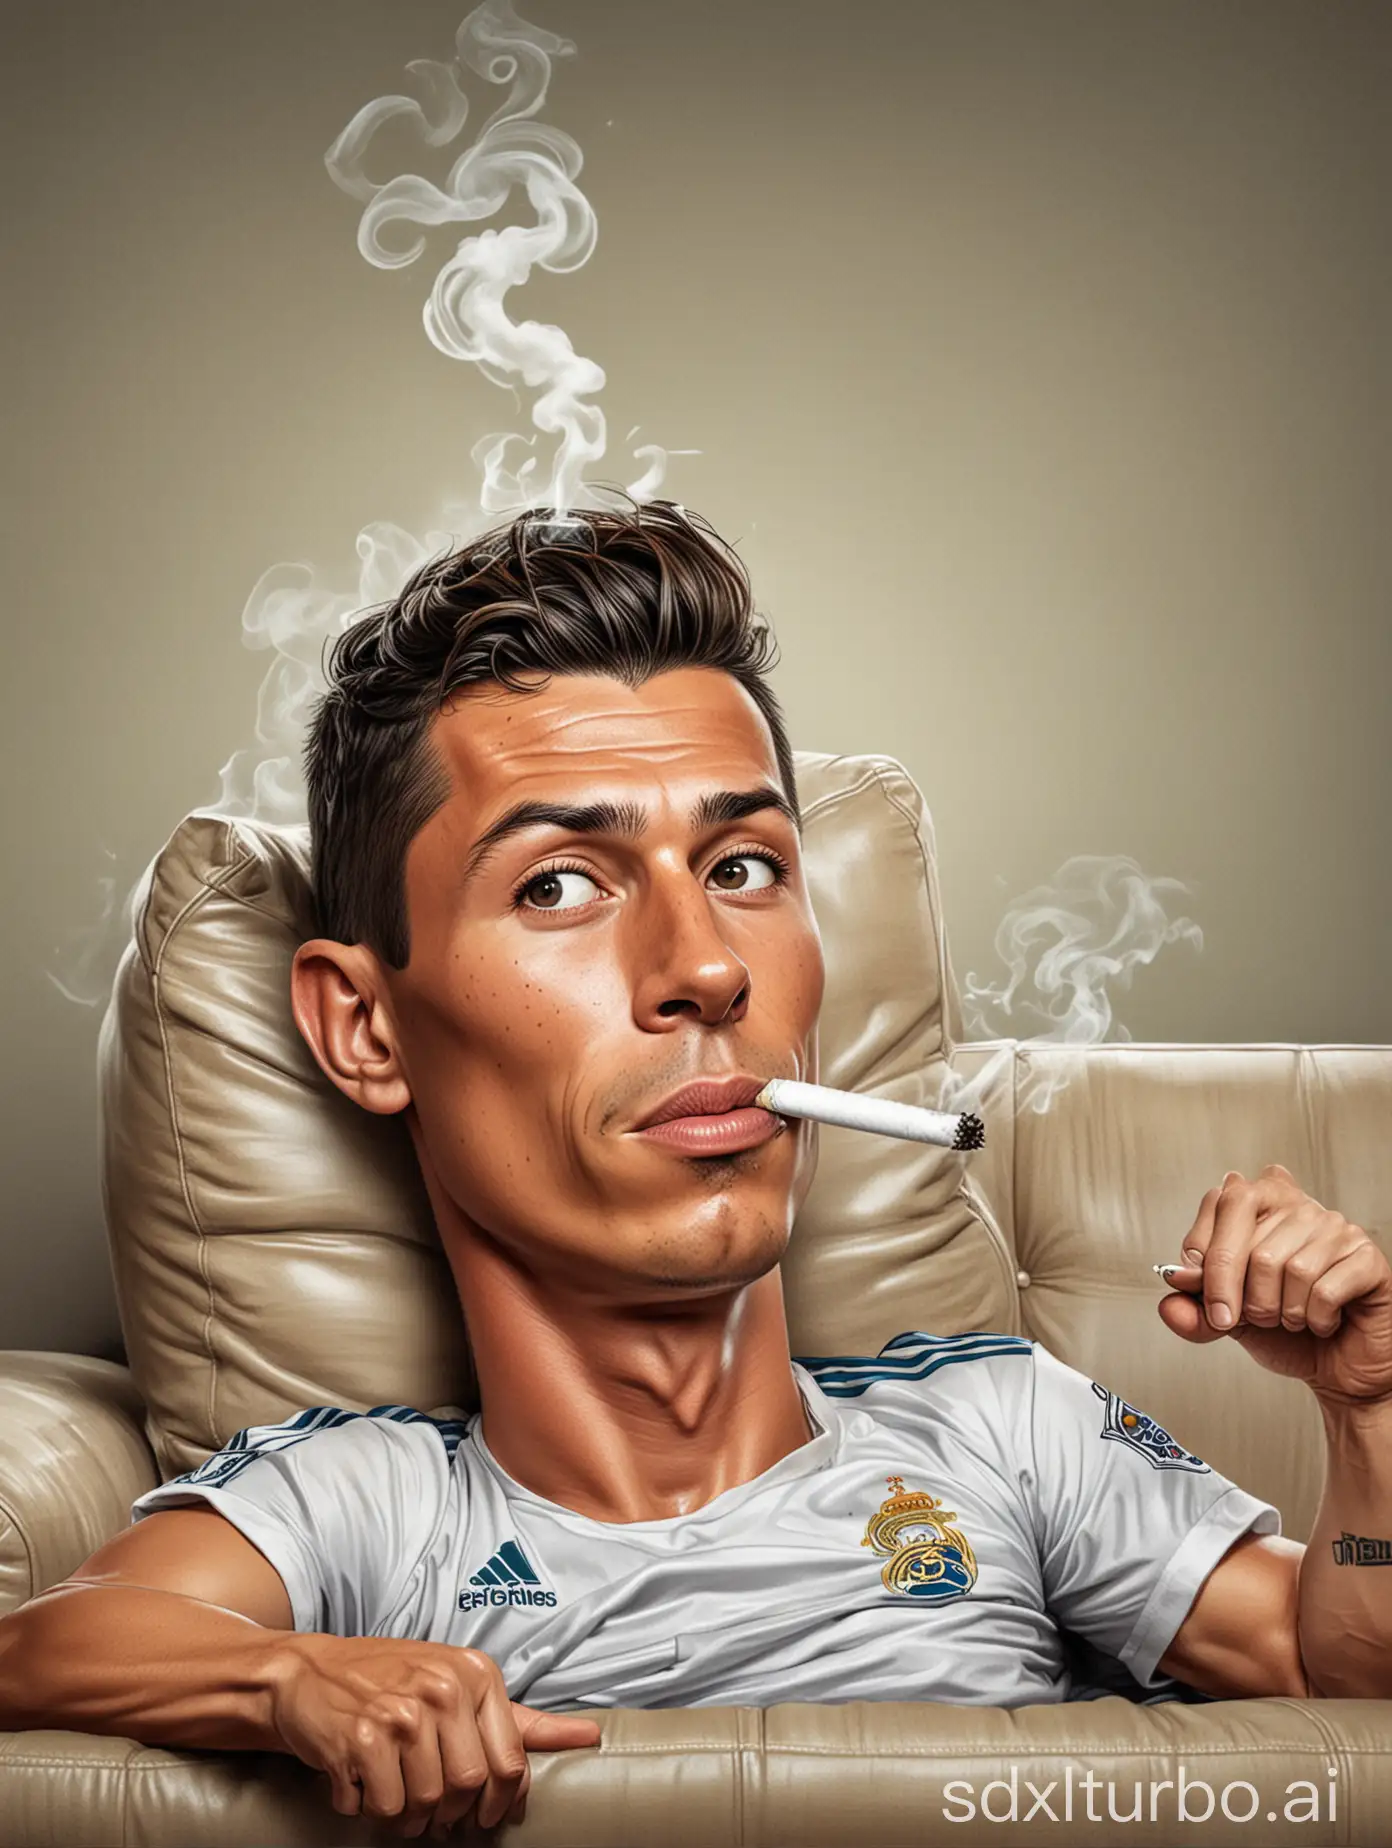 Caricature-of-Cristiano-Ronaldo-Smoking-on-Couch